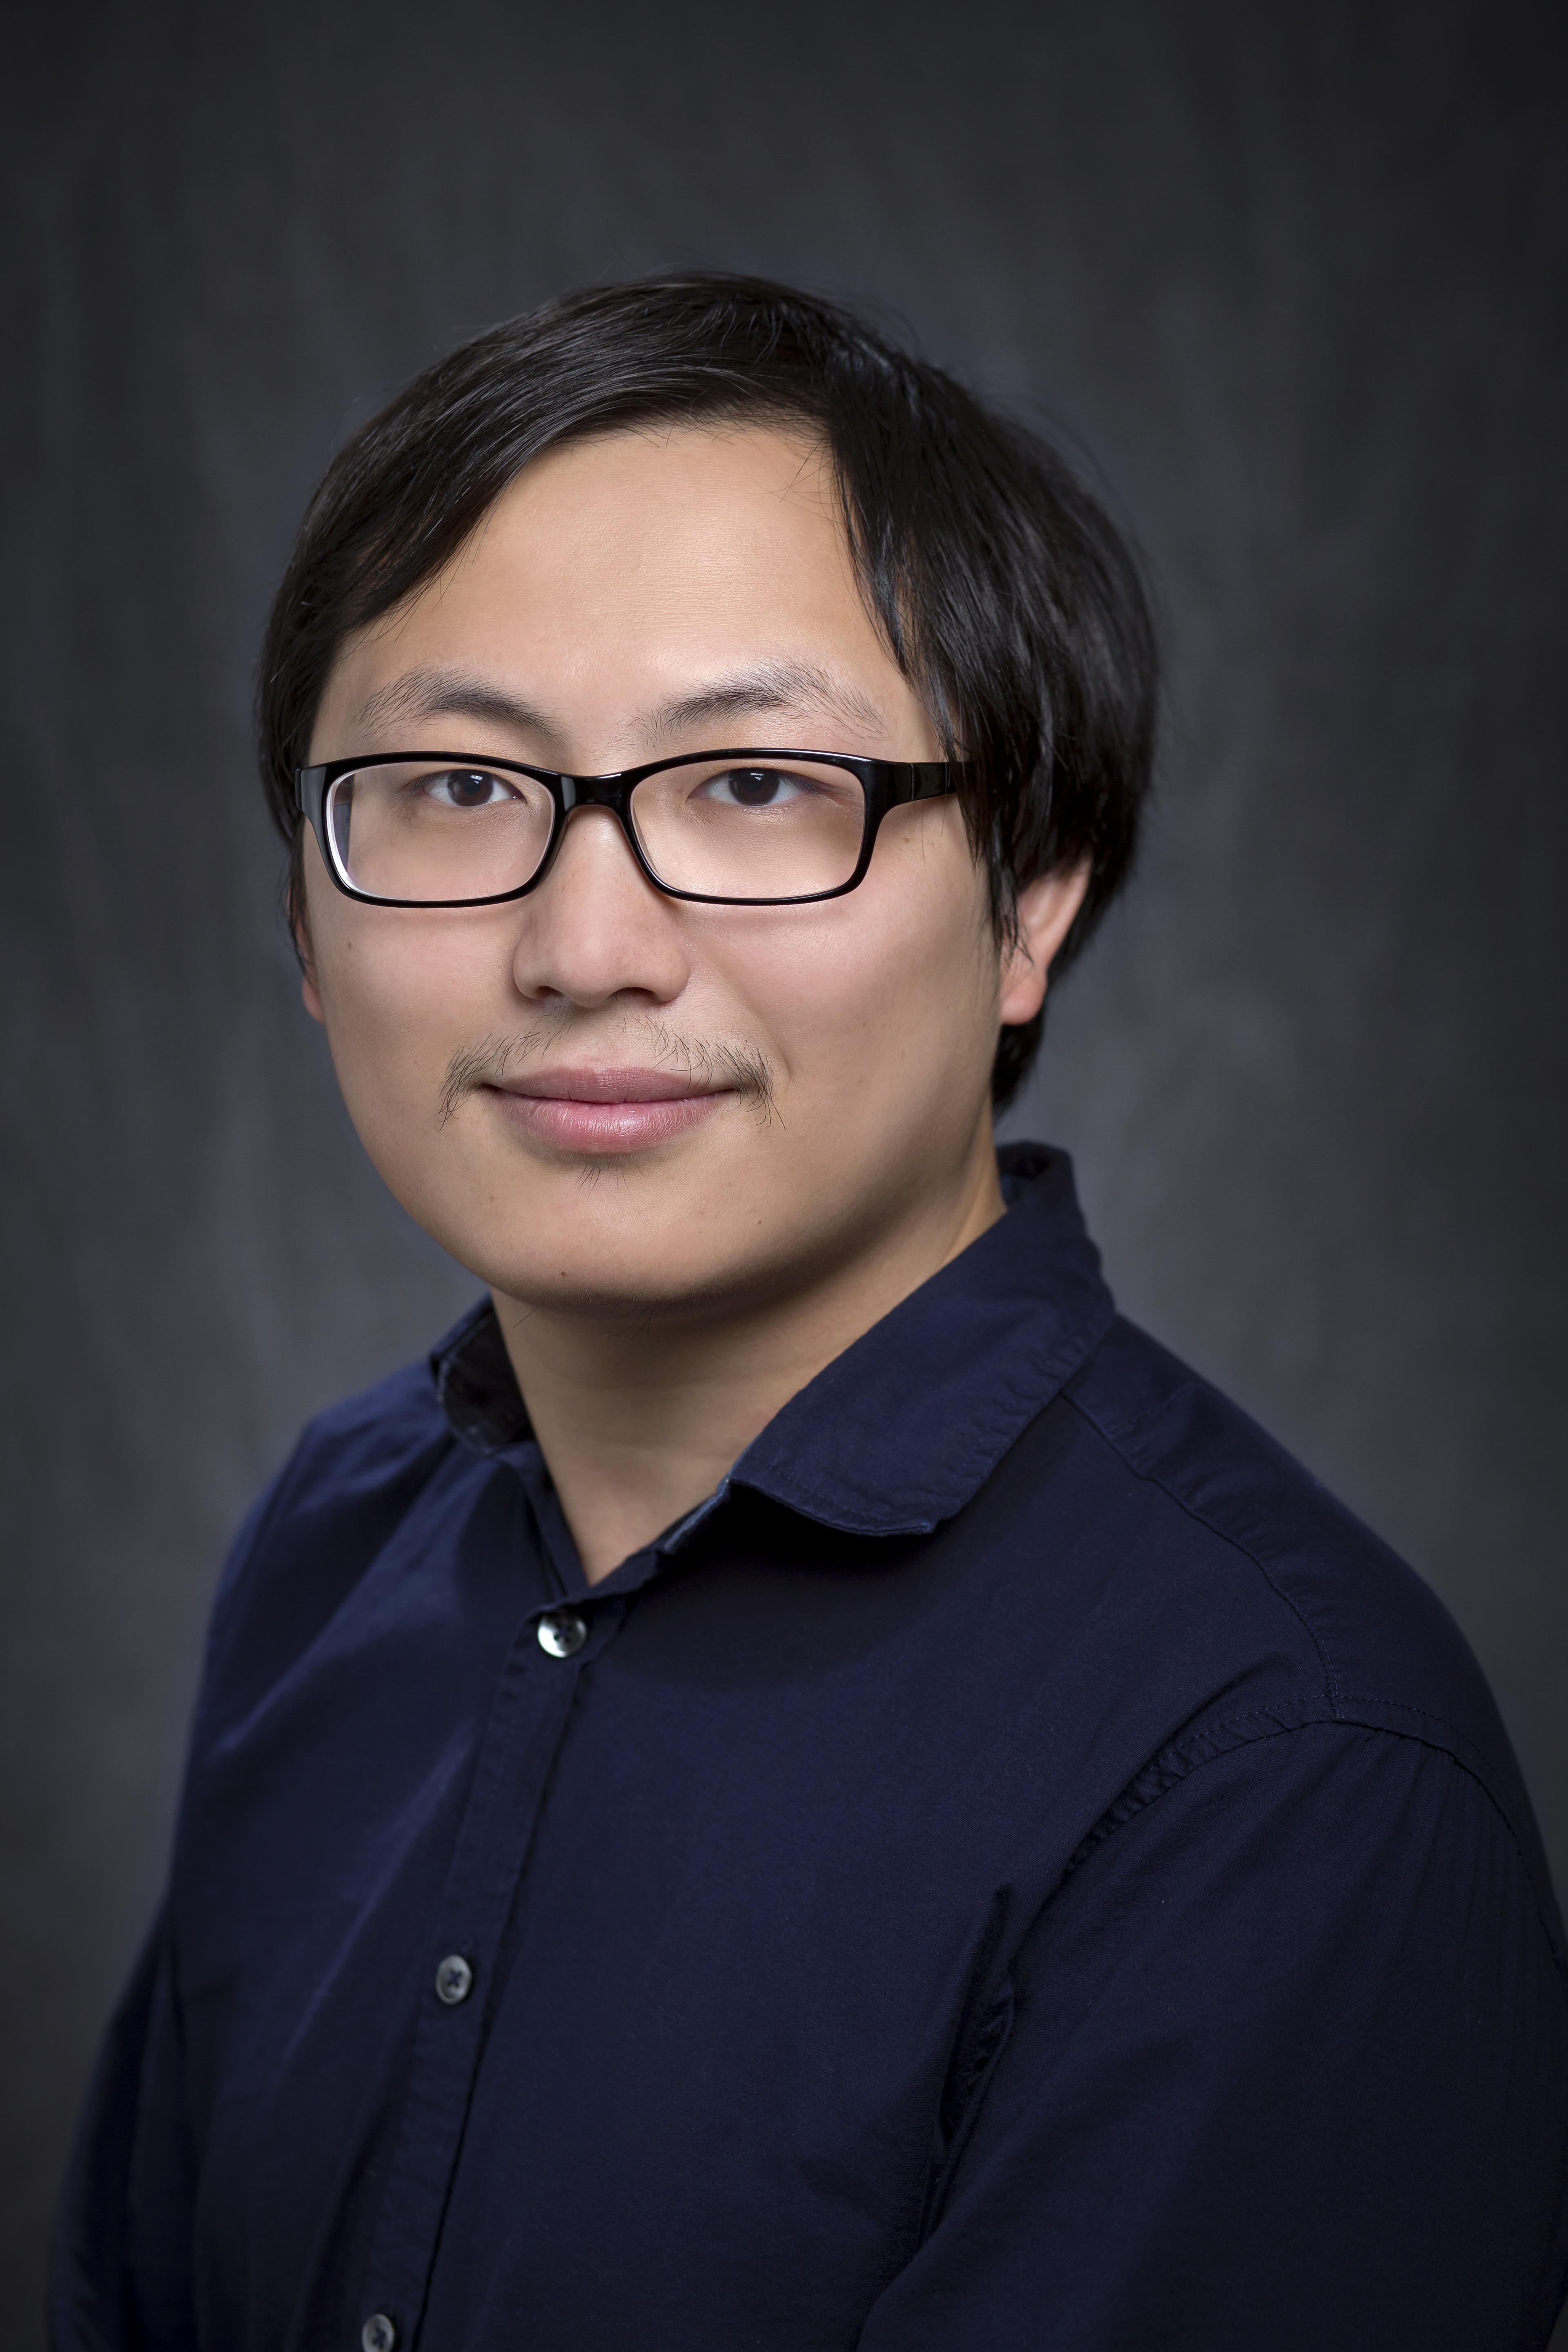 LSU Department of Chemistry Assistant Professor Tuo Wang